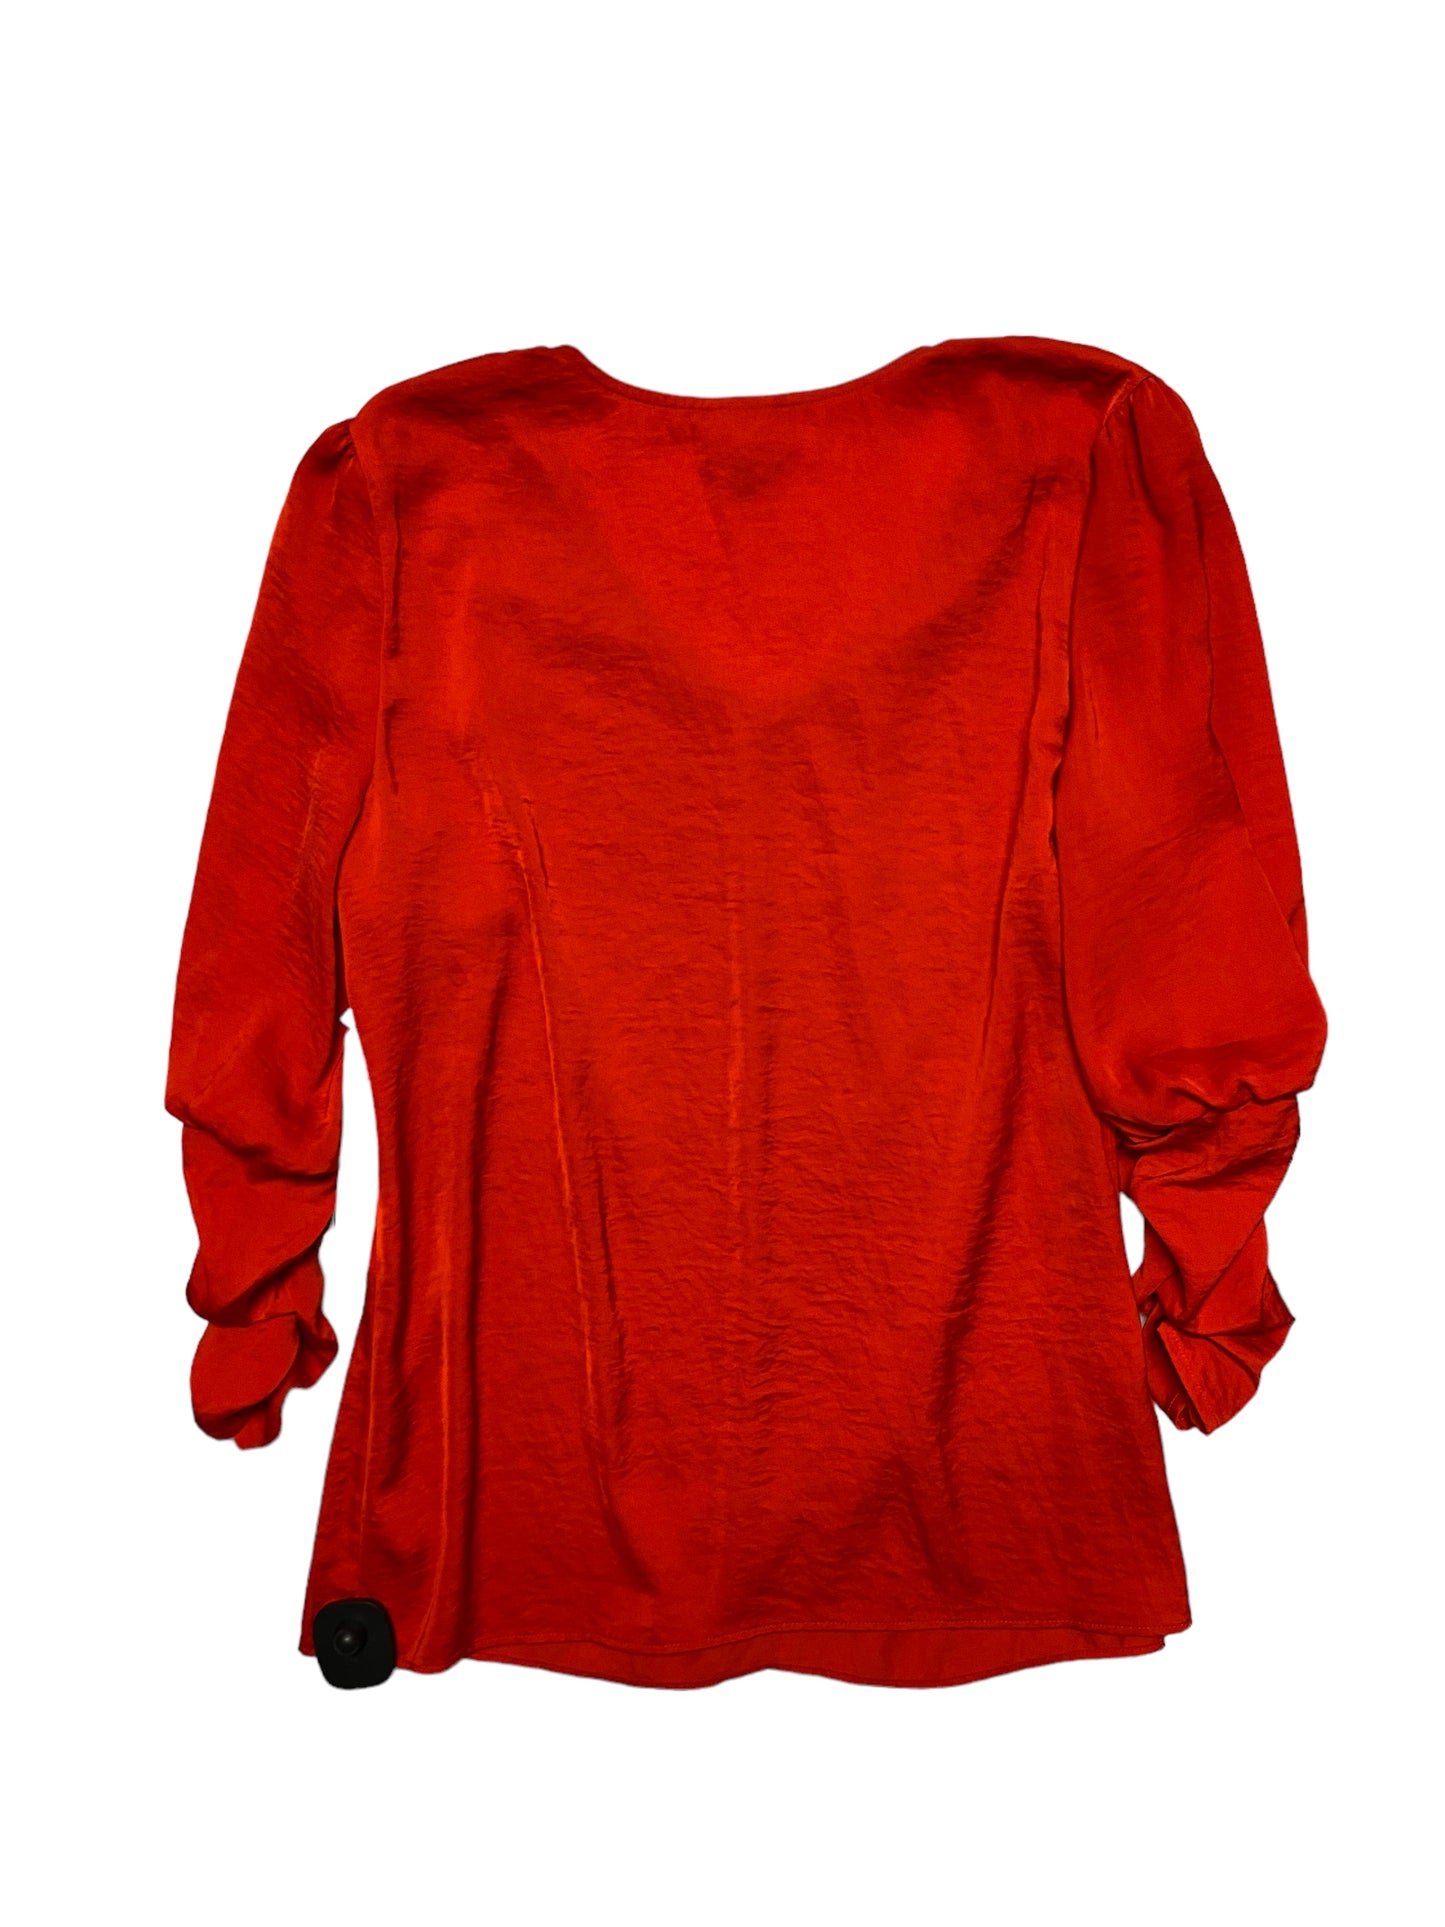 Red Top Long Sleeve Cabi, Size M